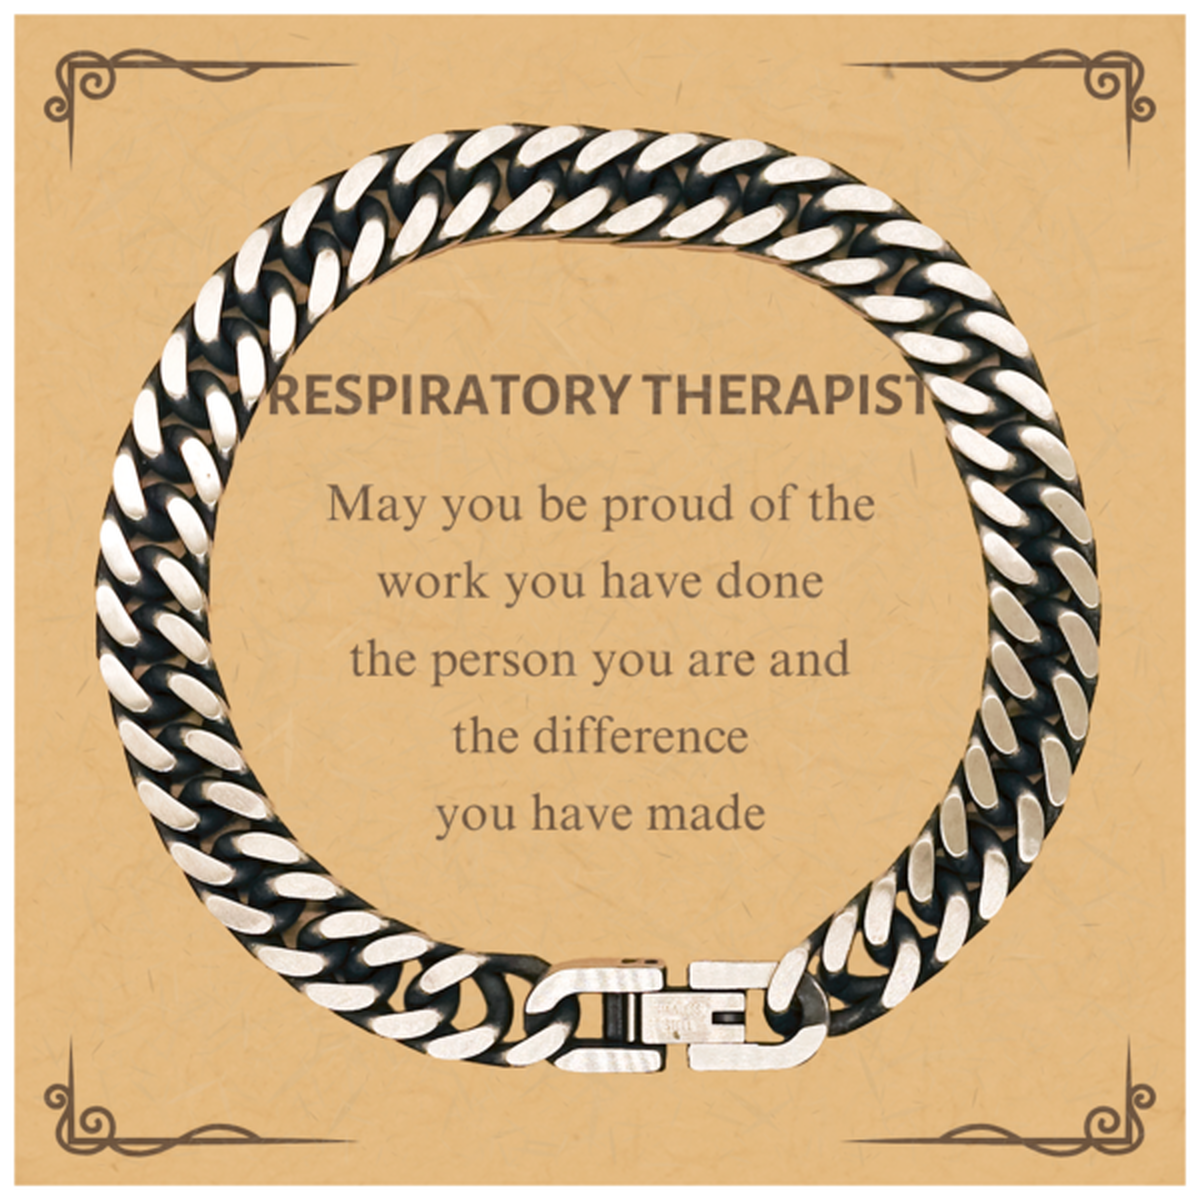 Respiratory Therapist May you be proud of the work you have done, Retirement Respiratory Therapist Cuban Link Chain Bracelet for Colleague Appreciation Gifts Amazing for Respiratory Therapist